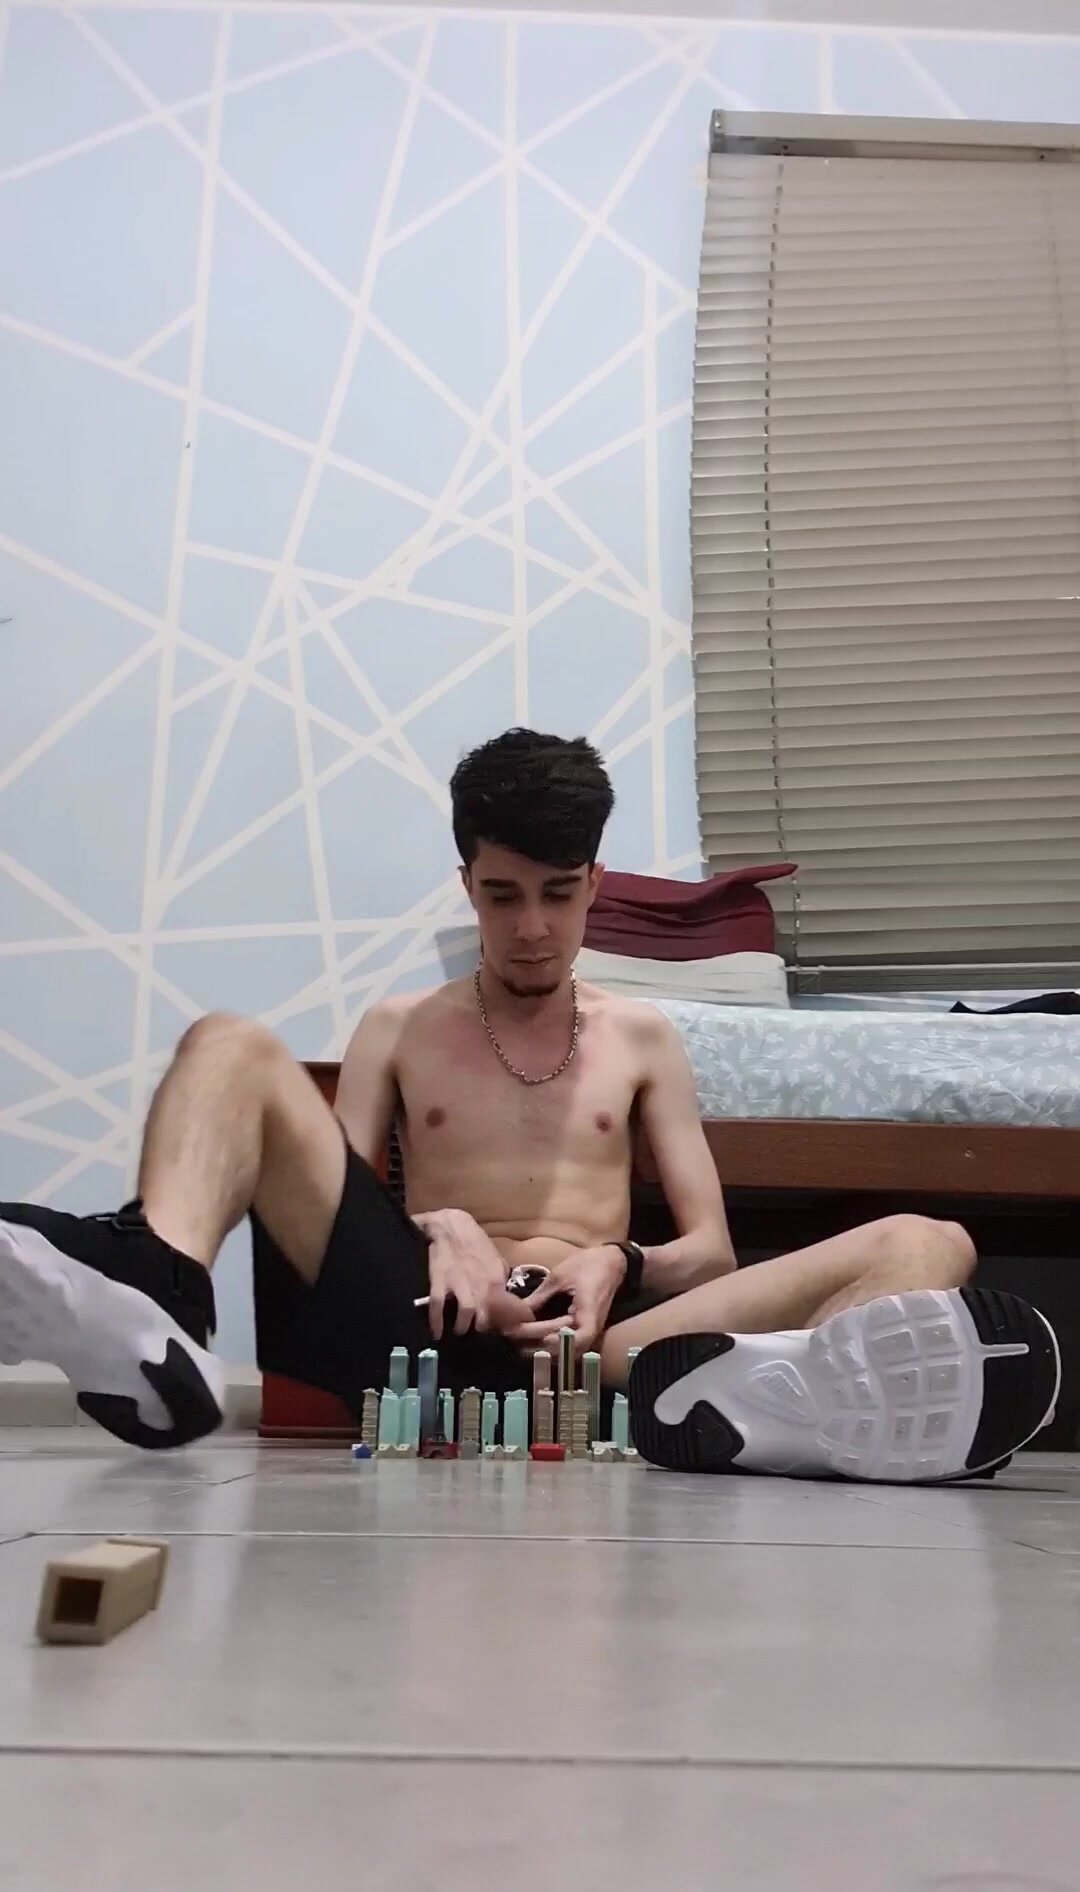 Giant Nike boy found a tiny city in his room